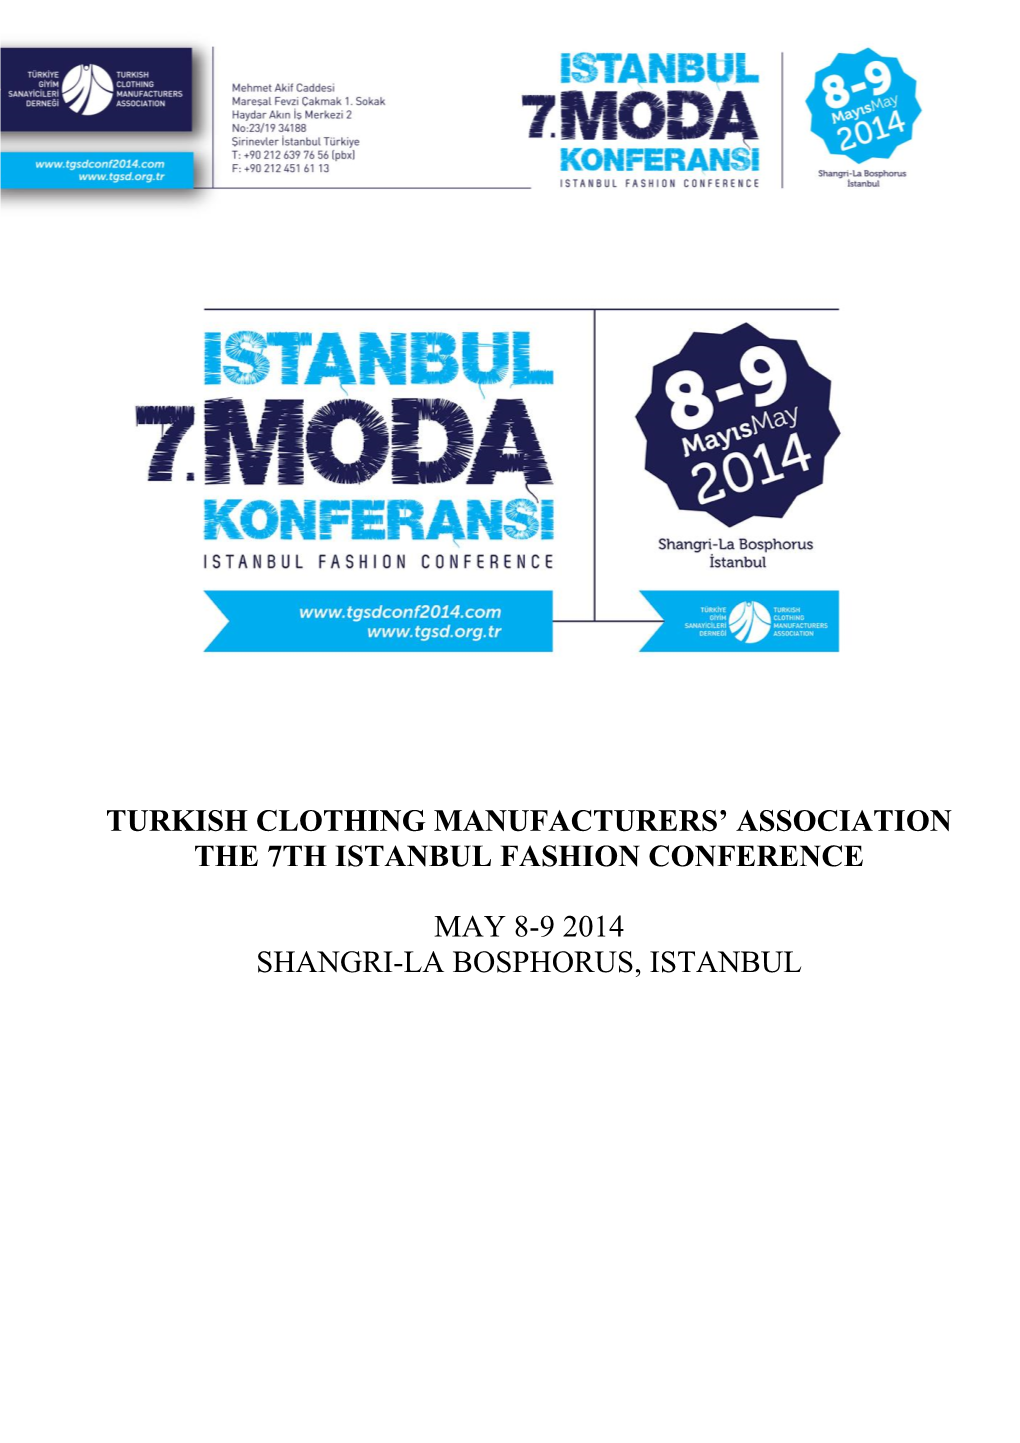 Turkish Clothing Manufacturers' Association the 7Th Istanbul Fashion Conference May 8-9 2014 Shangri-La Bosphorus, Istanbul